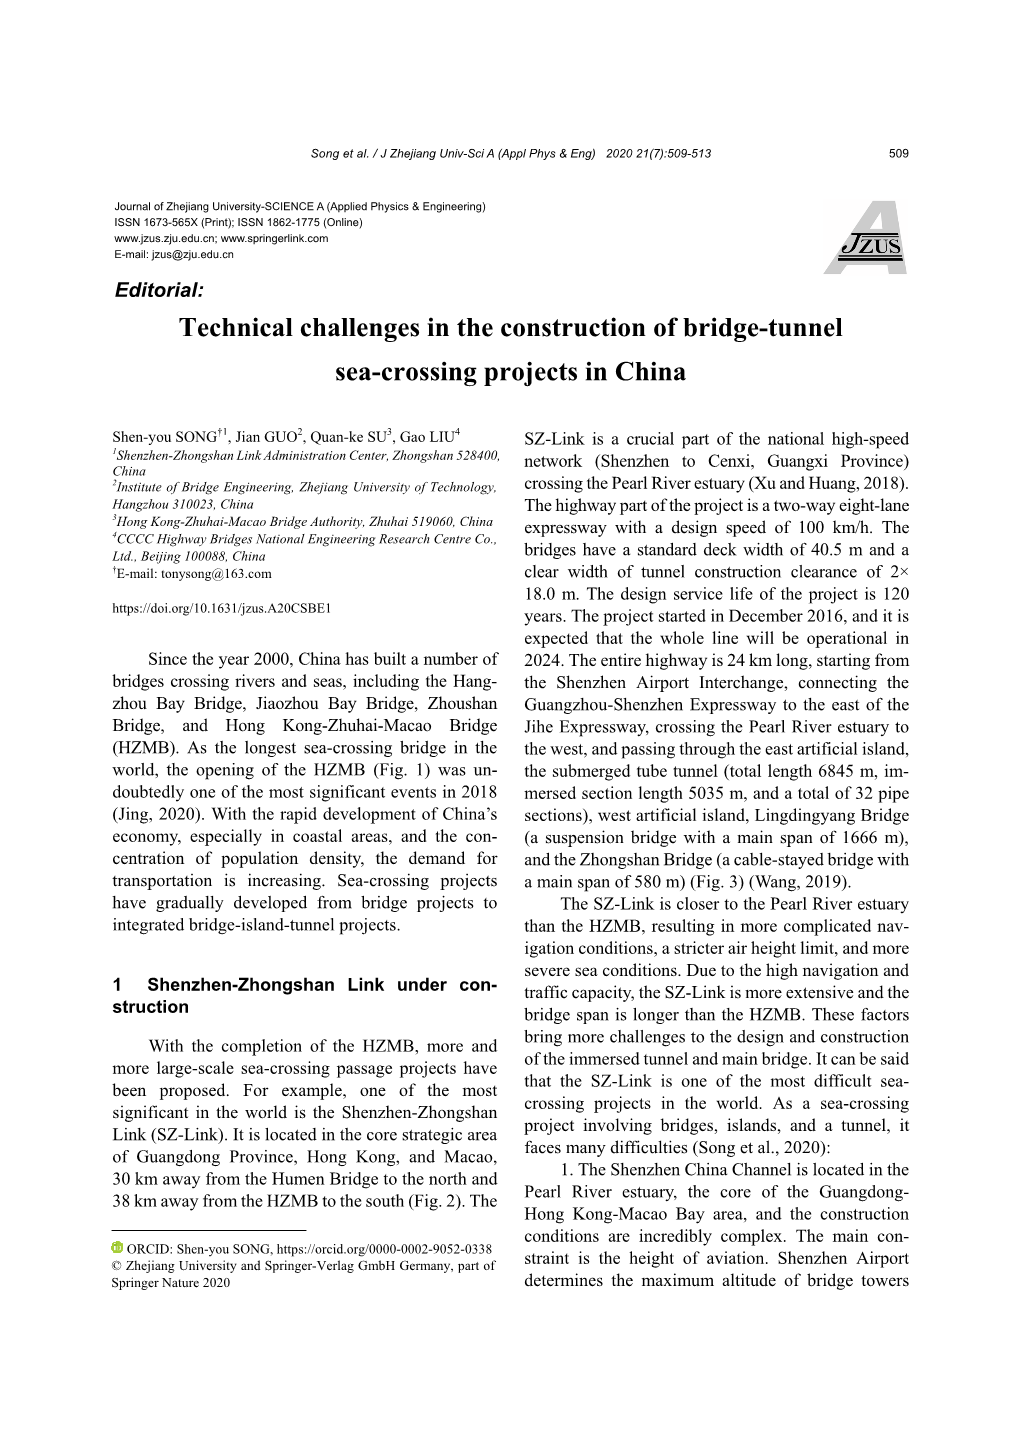 Technical Challenges in the Construction of Bridge-Tunnel Sea-Crossing Projects in China